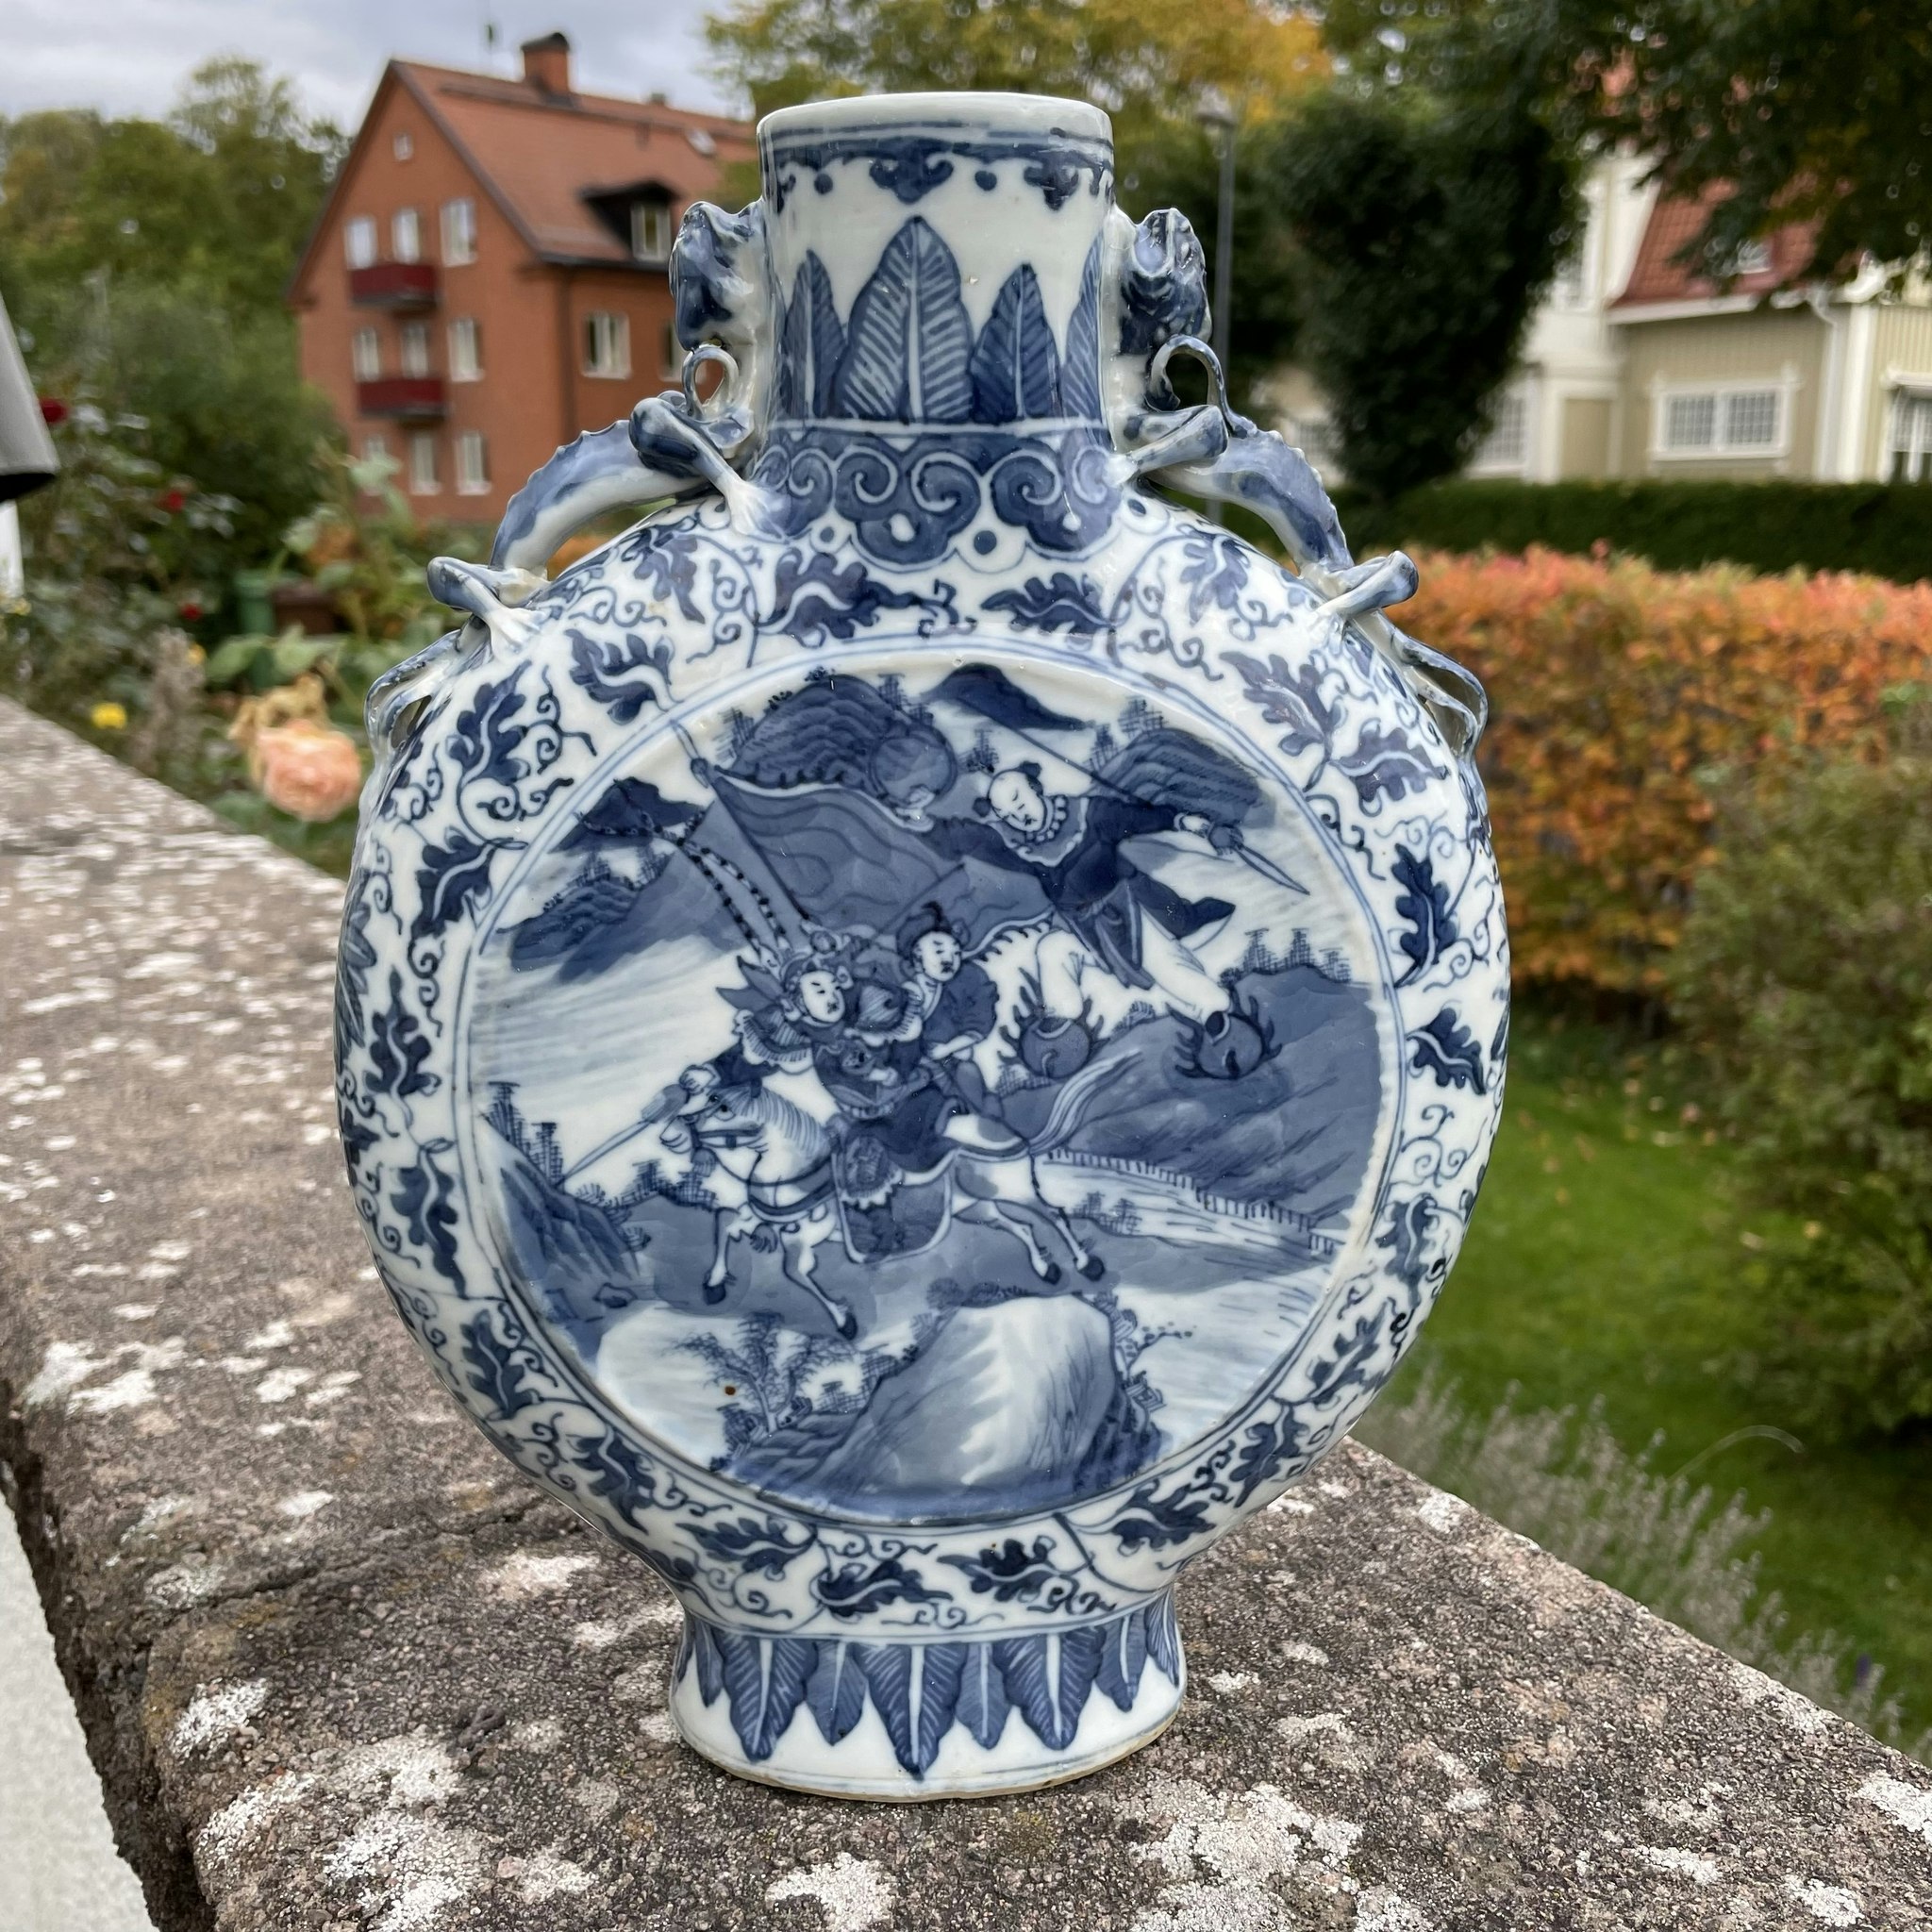 Antique Chinese Porcelain Moonflask Vase Late Qing Dynasty